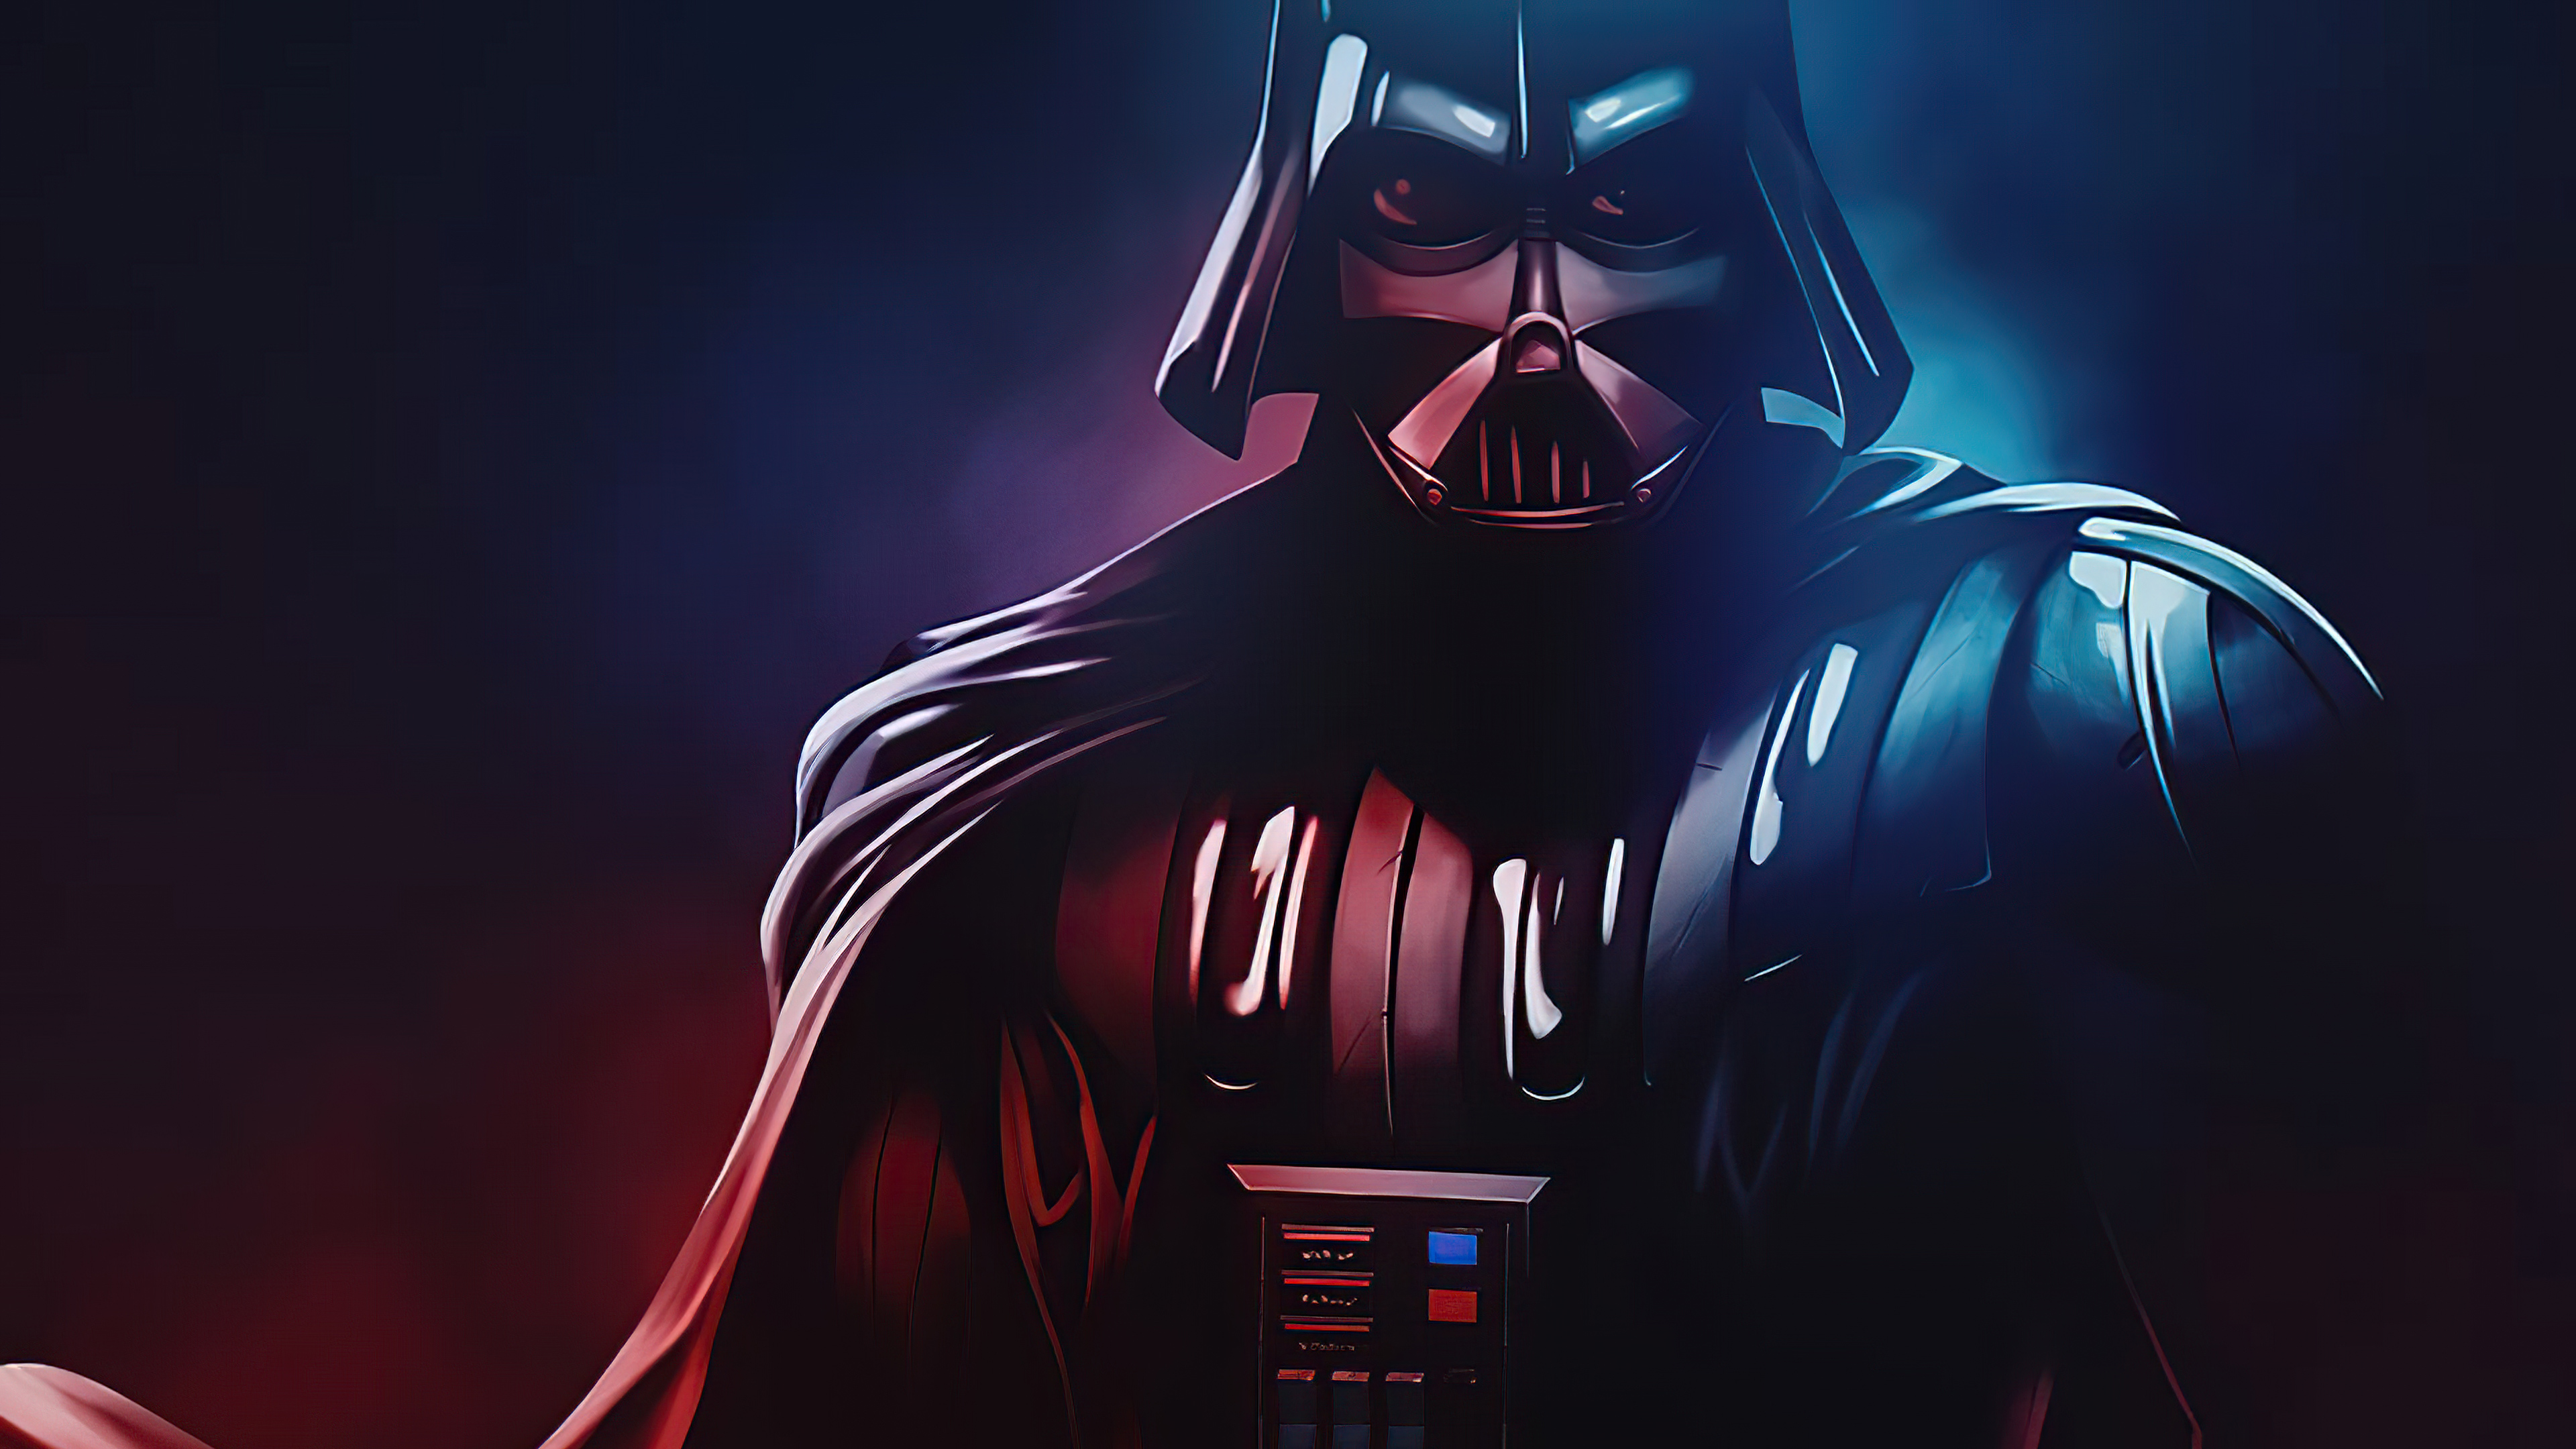 star wars animated wallpaper for android lockscreen